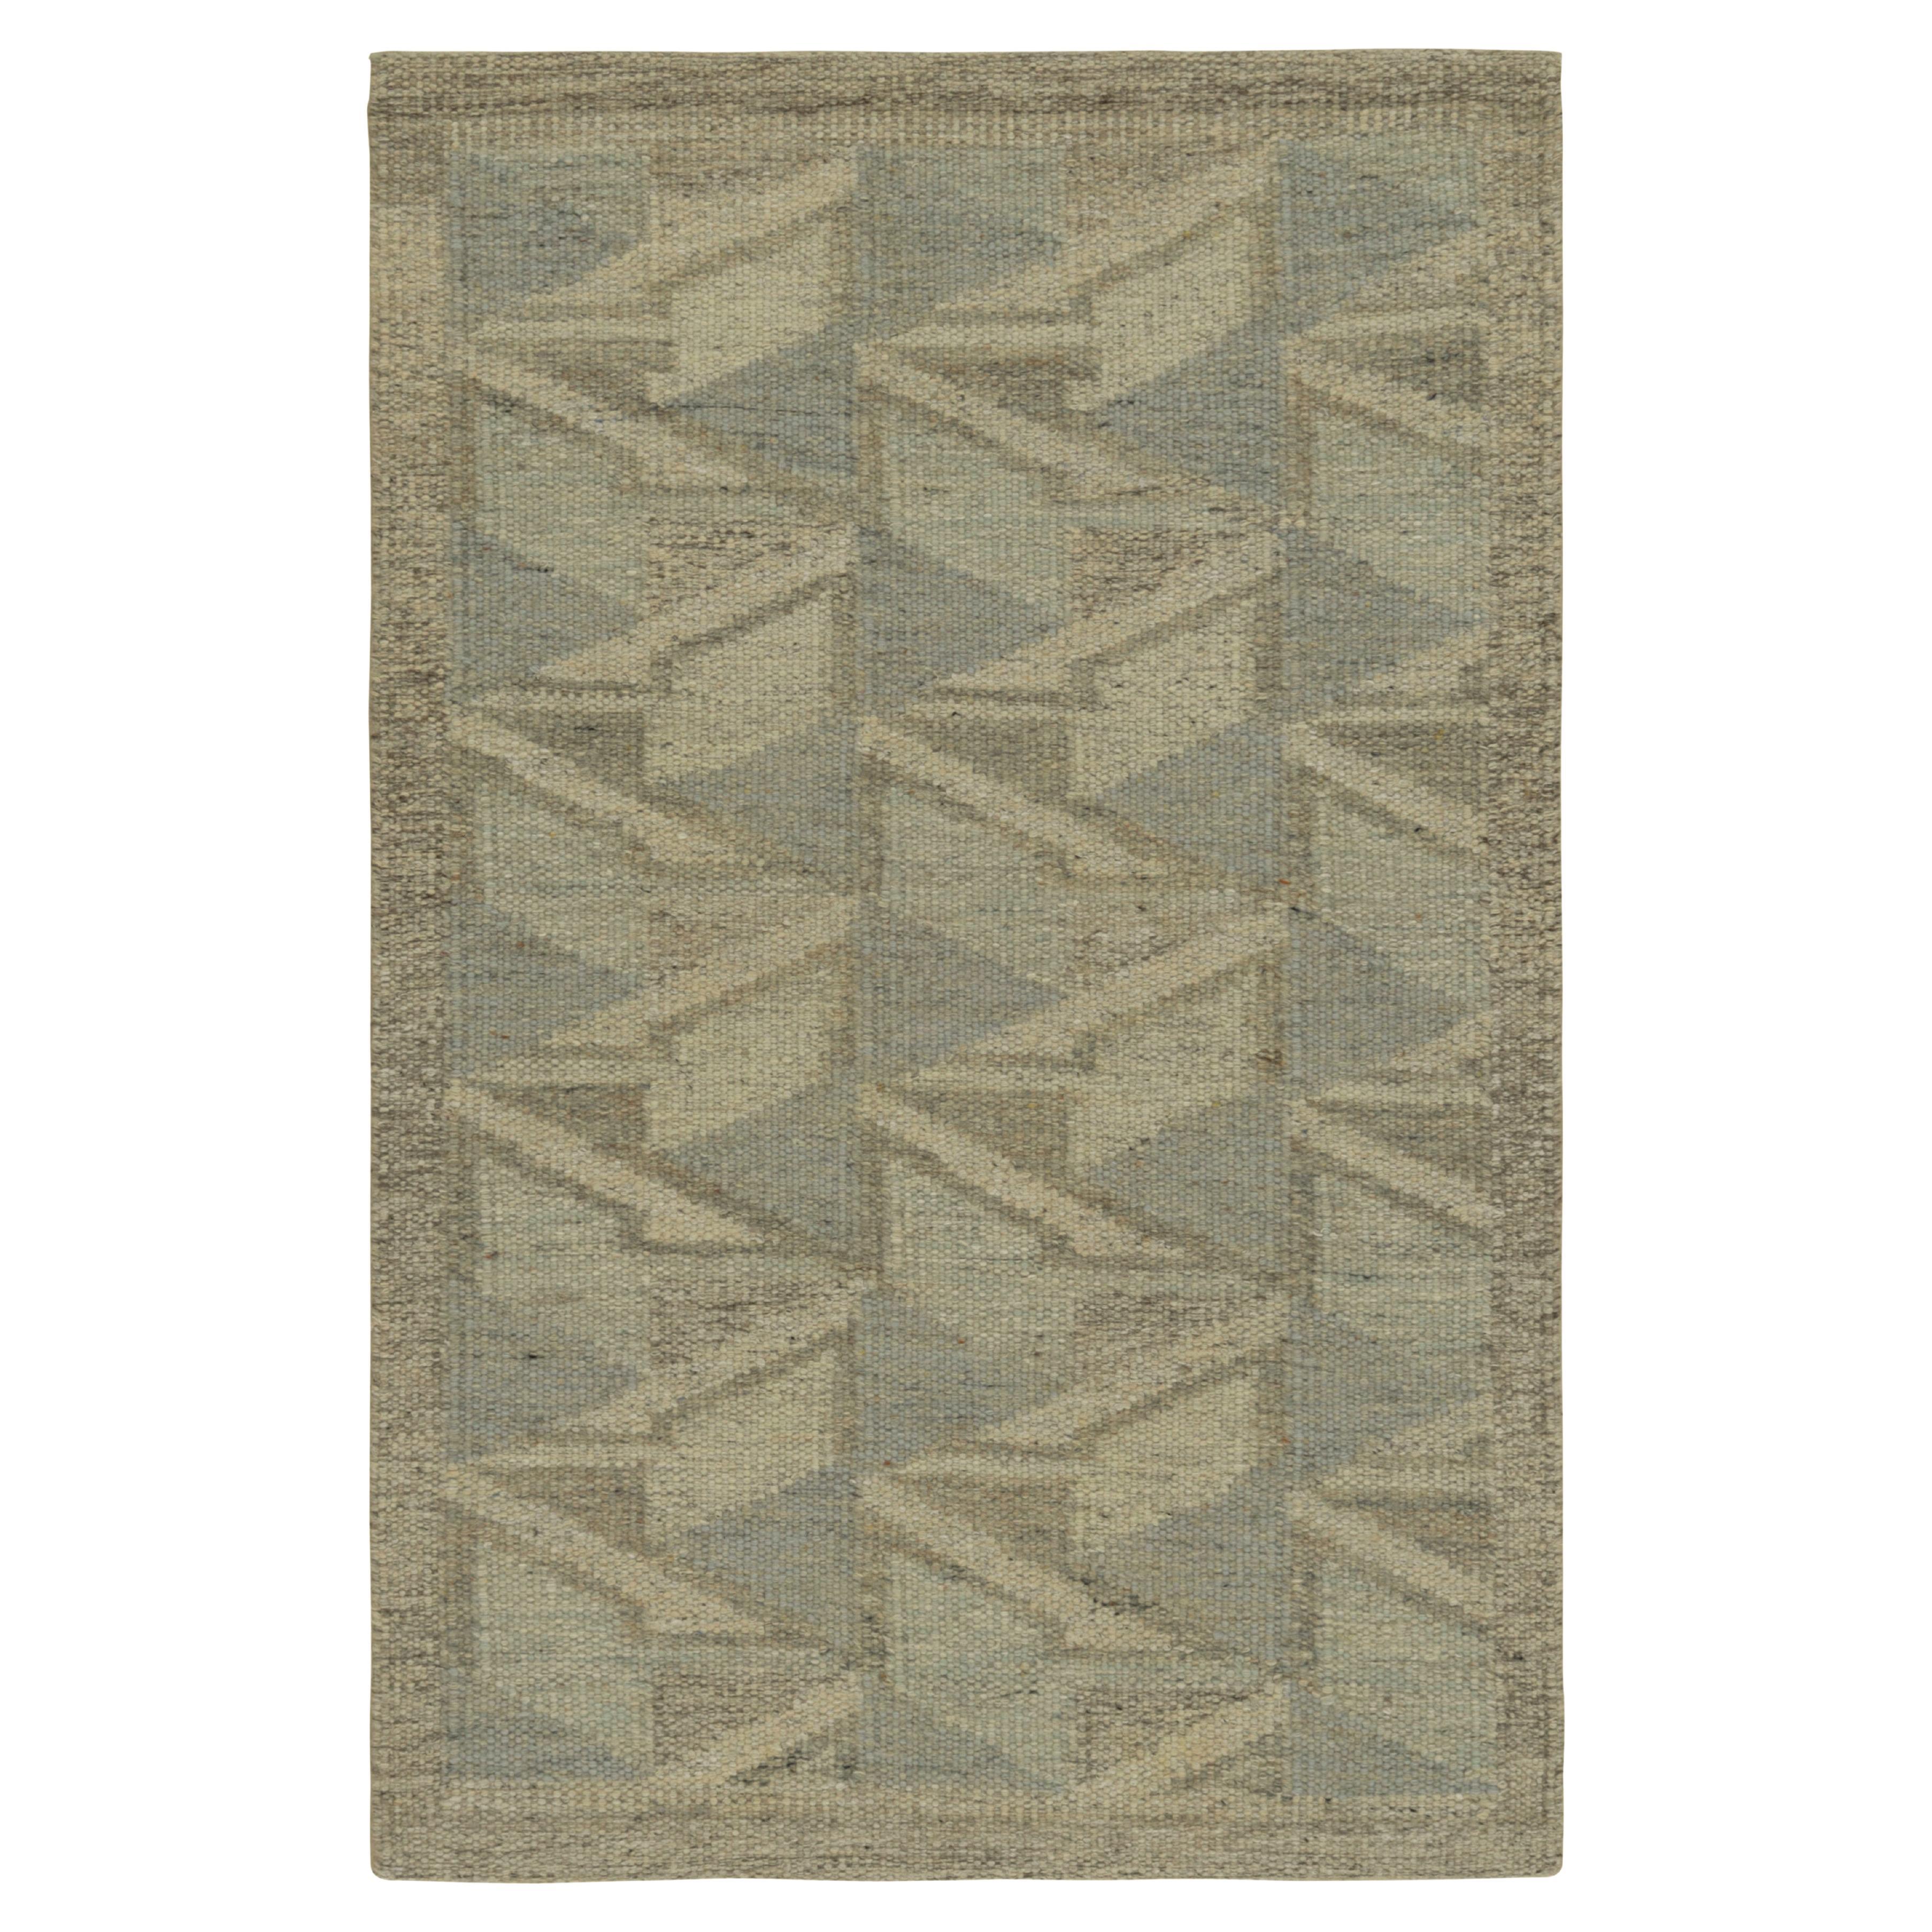 Rug & Kilim’s Scandinavian Style Rug in Blue and Gray, with Geometric Patterns